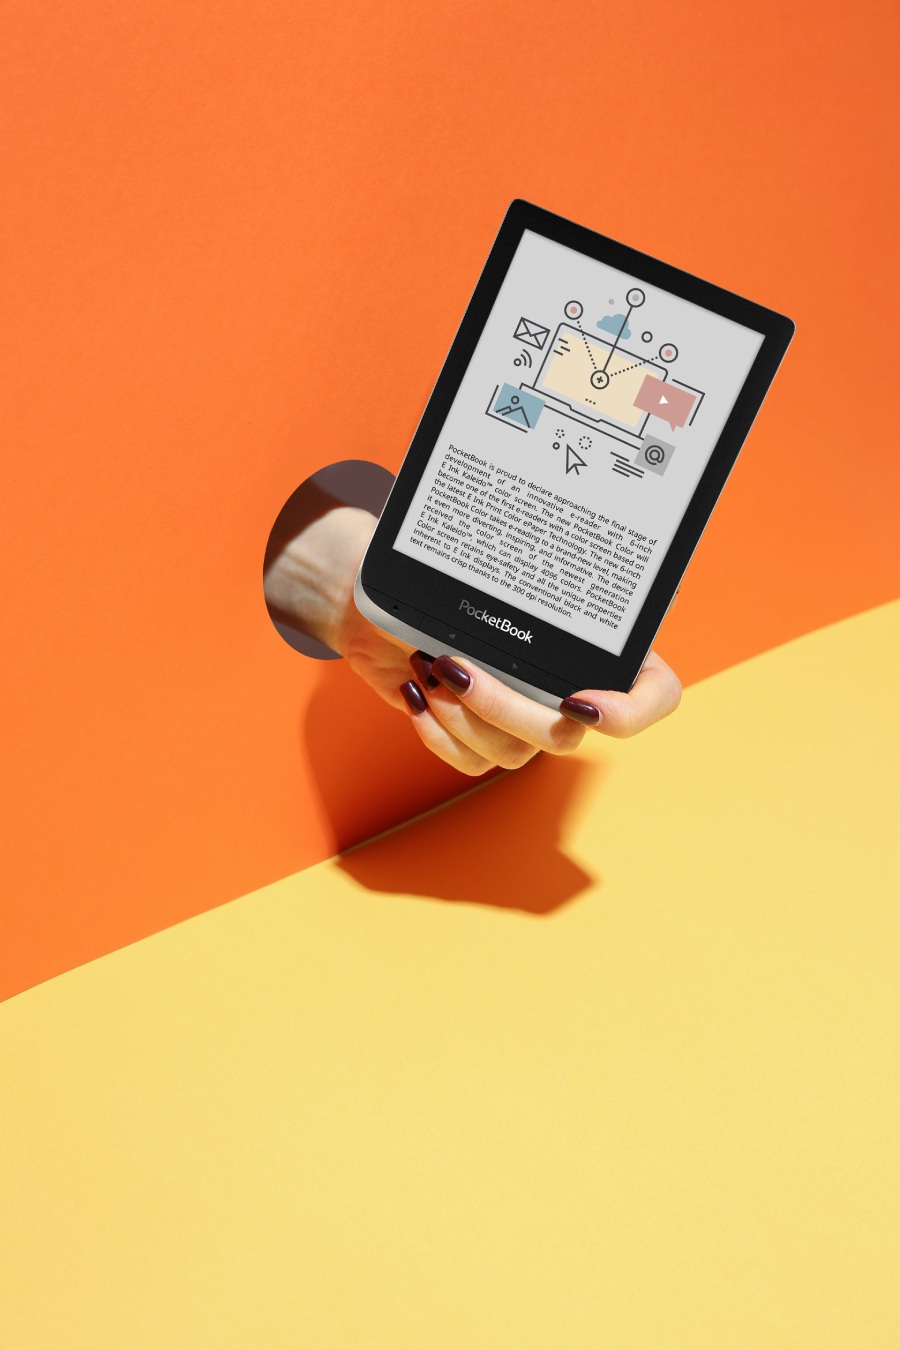 World's First Color E-Book Reader Goes on Sale